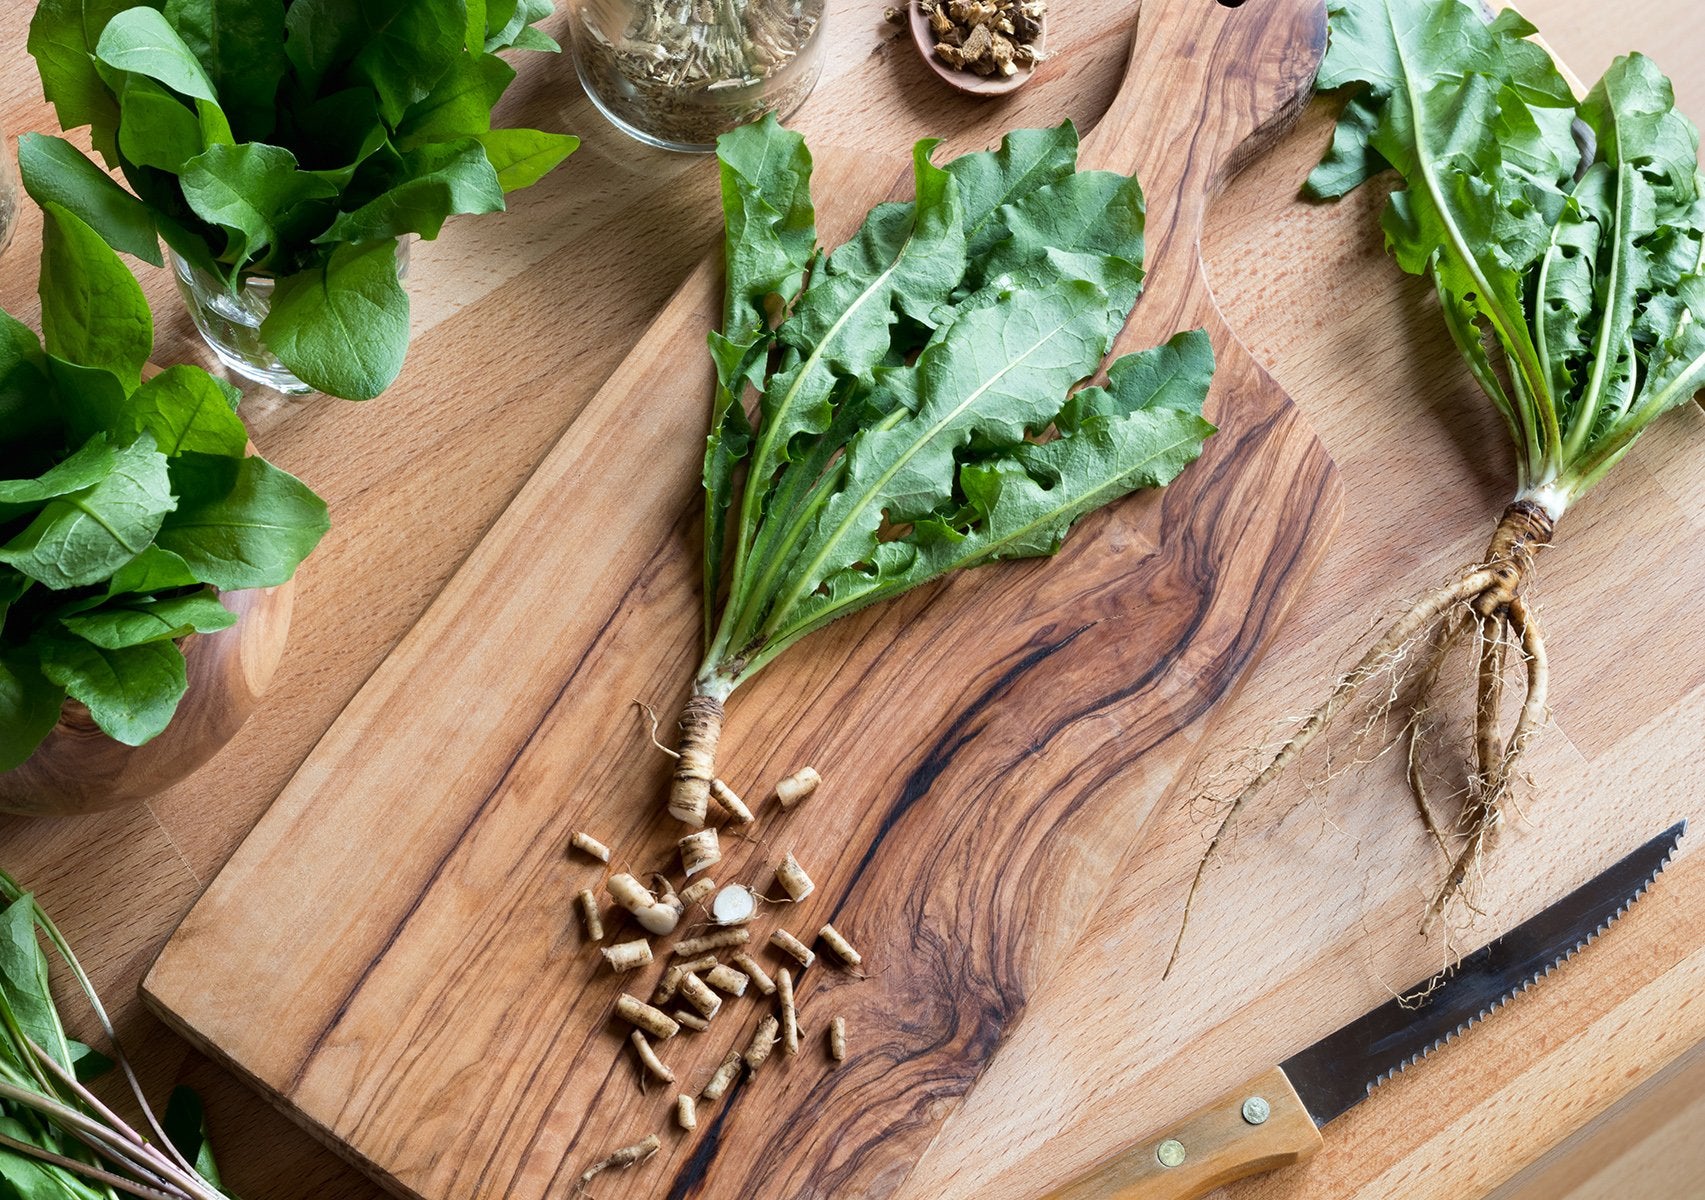 Cut-up dandelion root on a wooden cutting board on a table